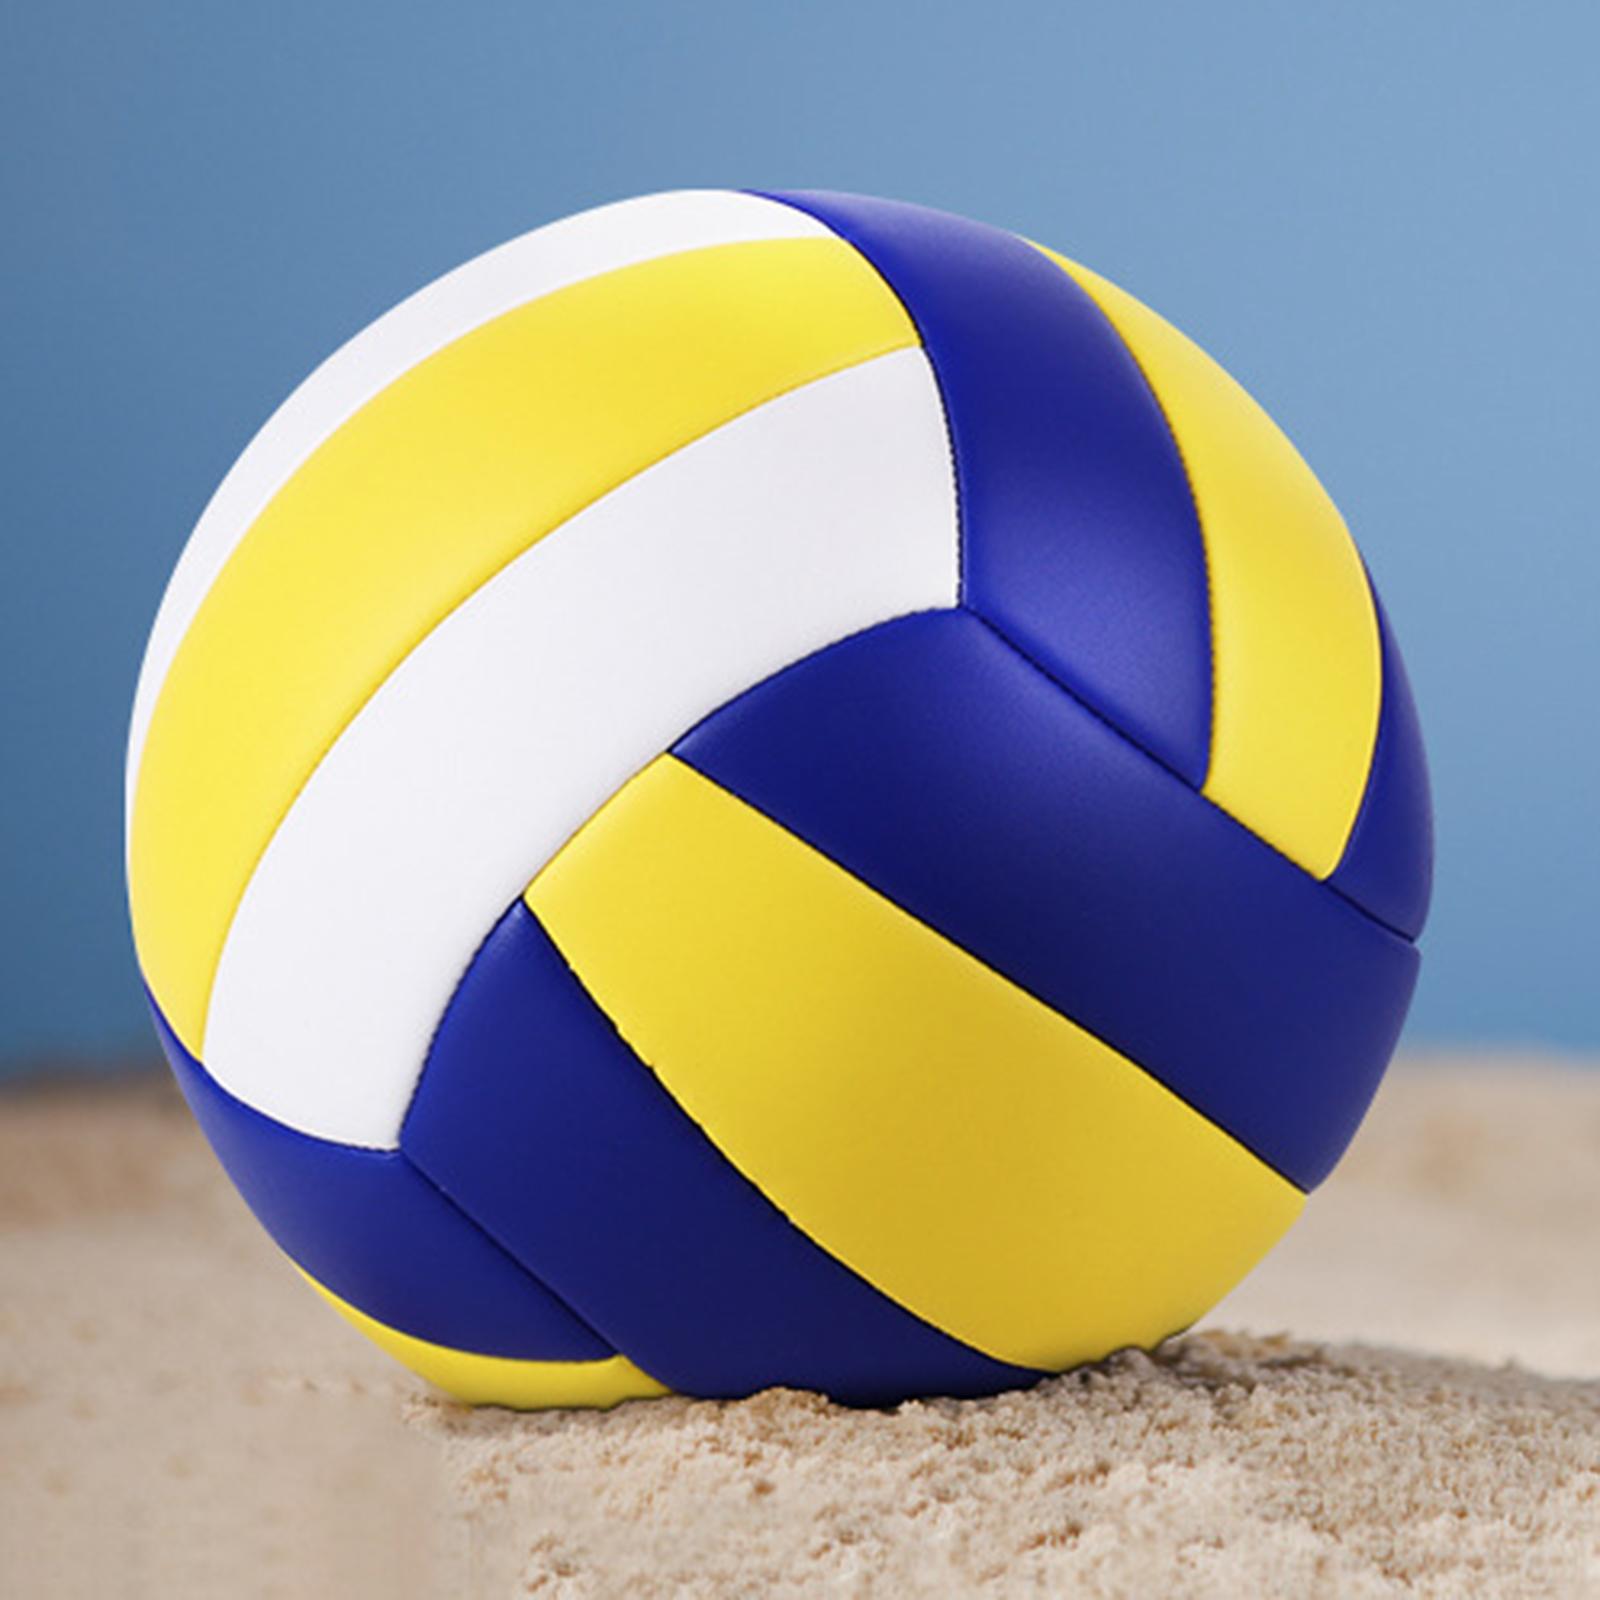 Professional Indoor Volleyball PU Leather Outdoor Ball w/ Ball Pump Beach Gym Training play children Beginner Teenager Blue Yellow - image 4 of 11